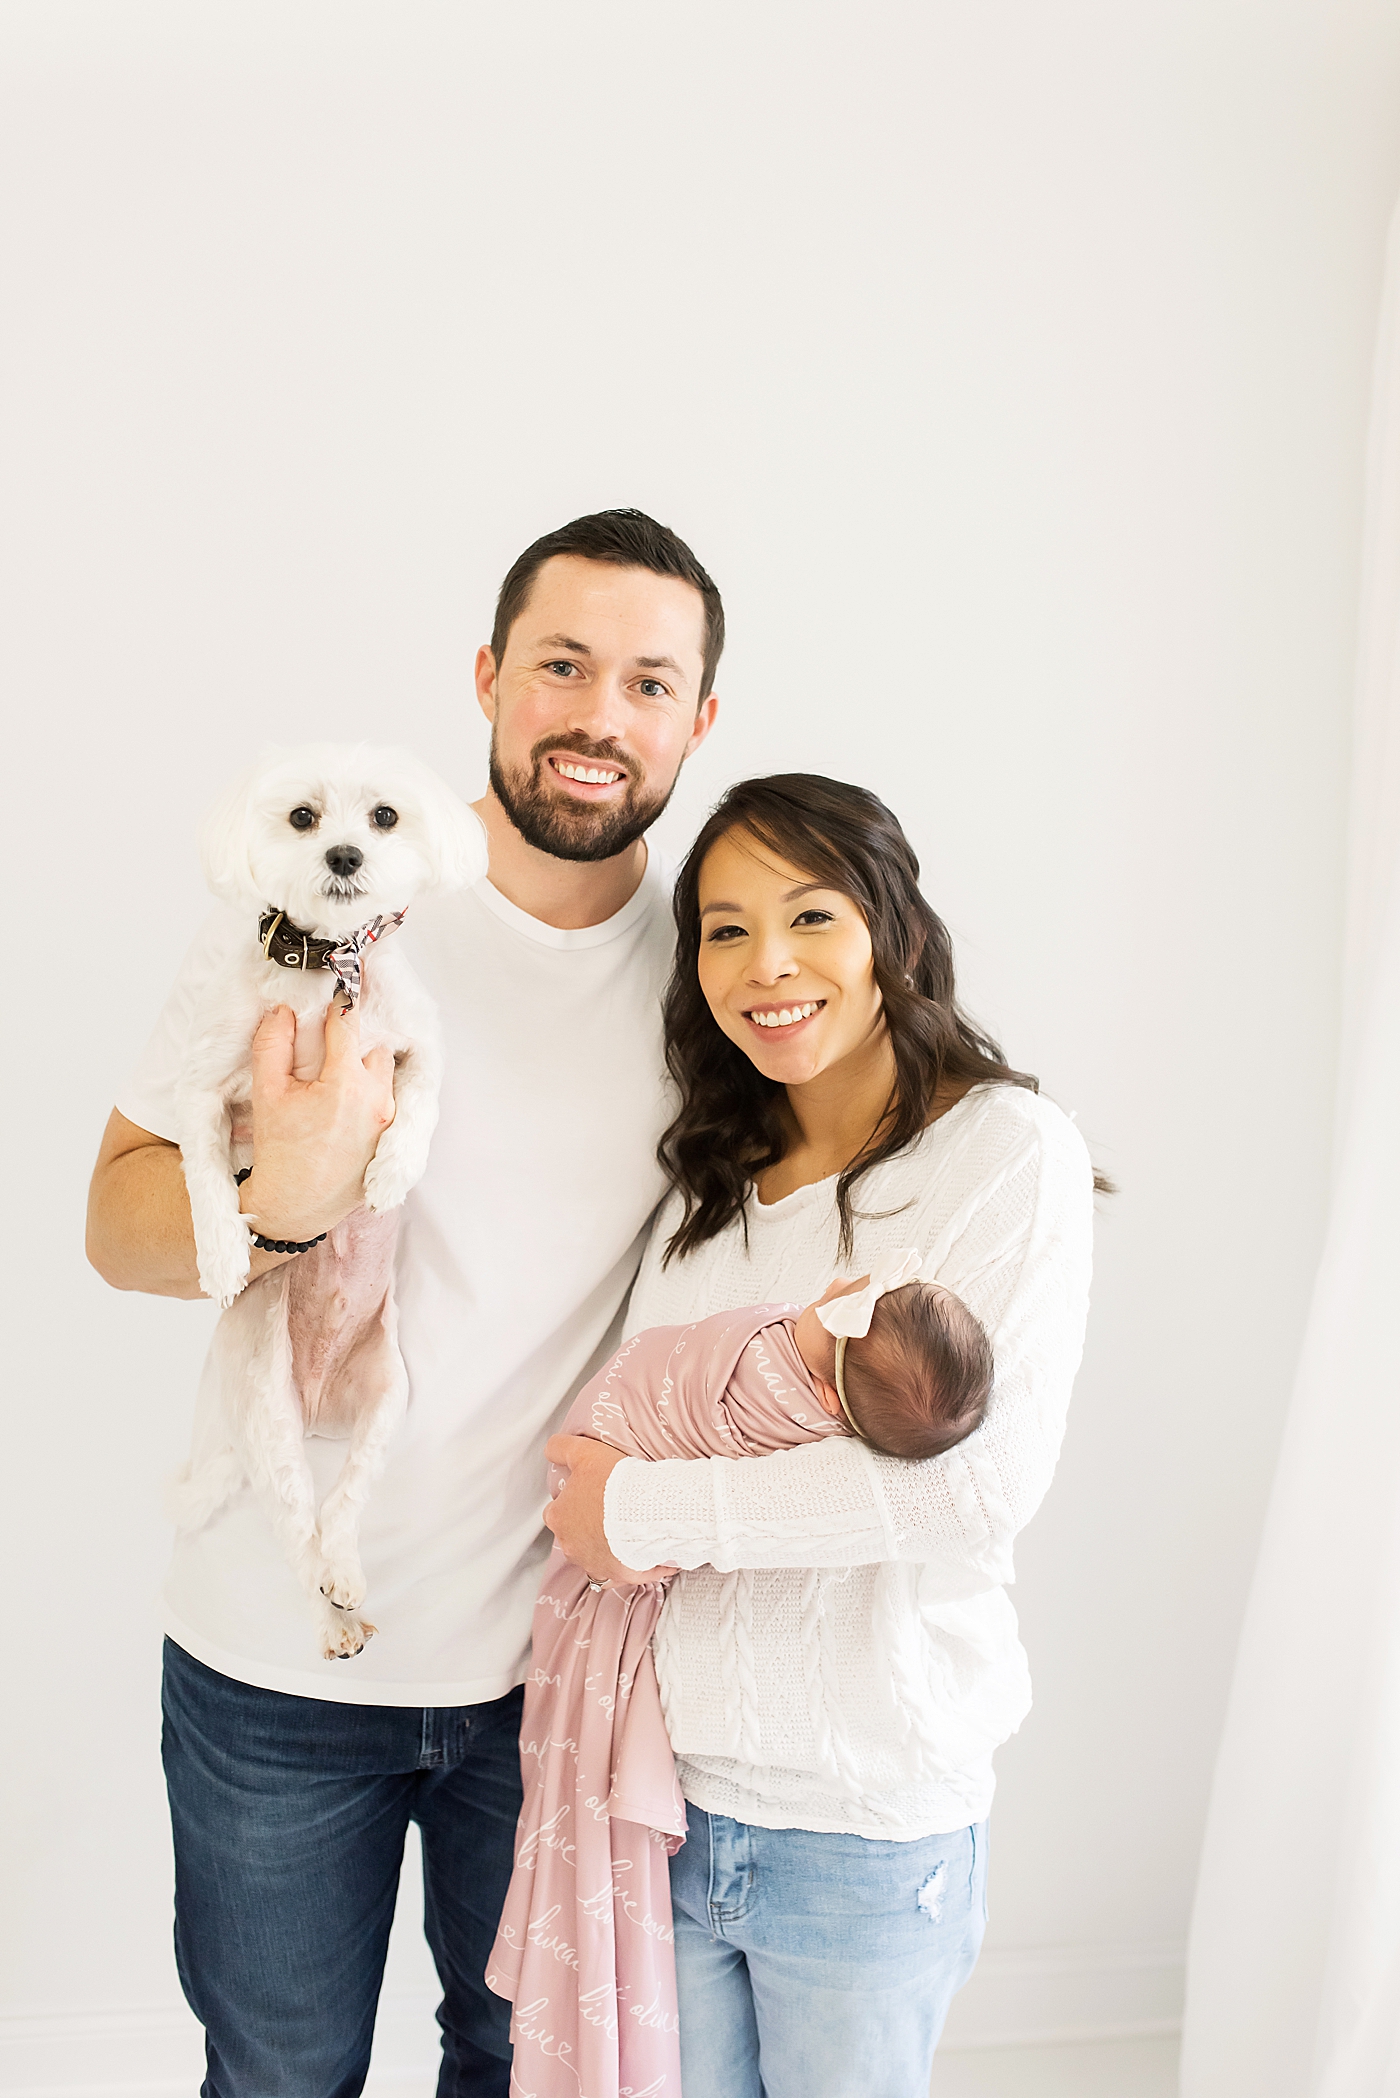 Newborn studio session for family and their new baby including their puppy | Photo by Anna Wisjo Photography